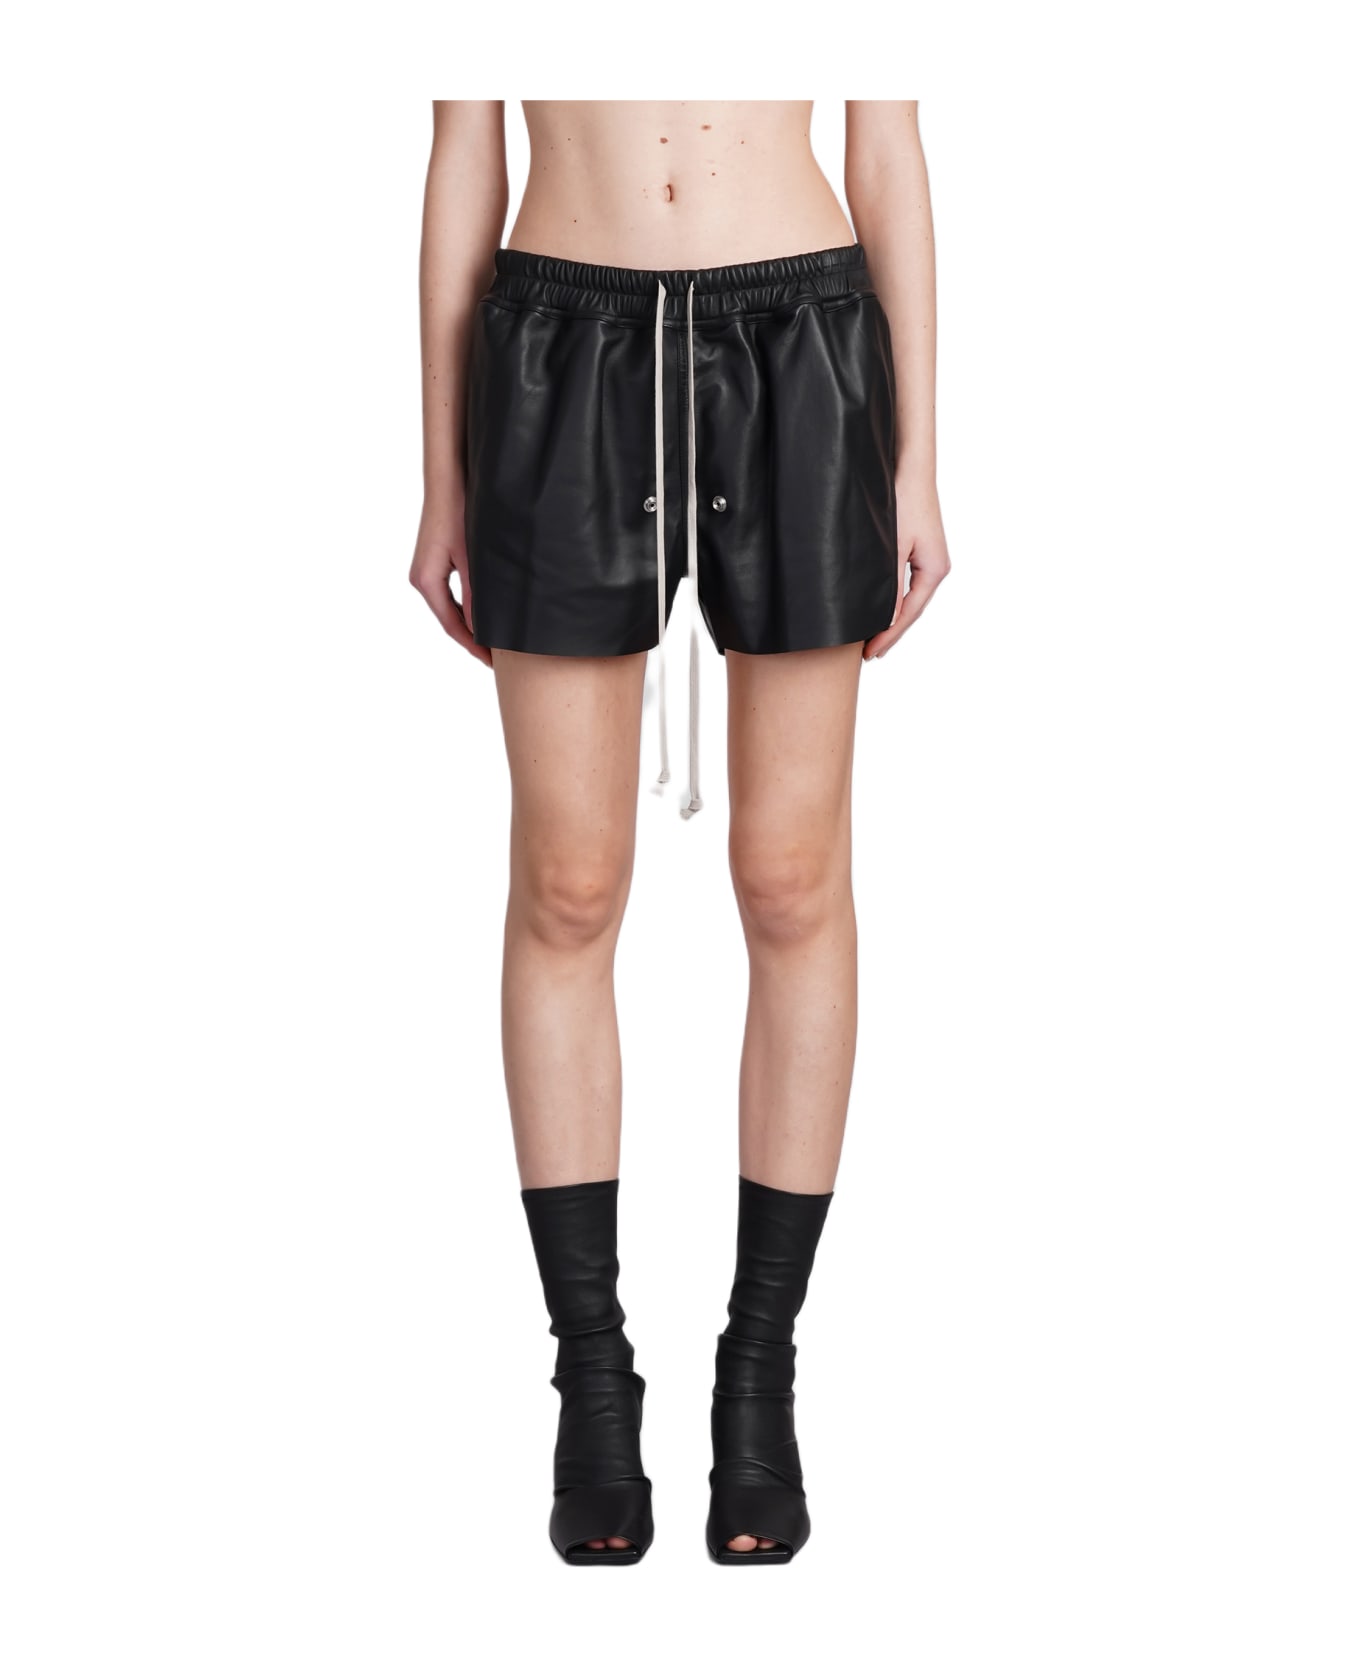 Rick Owens Gabe Boxers Shorts In Black Leather - black